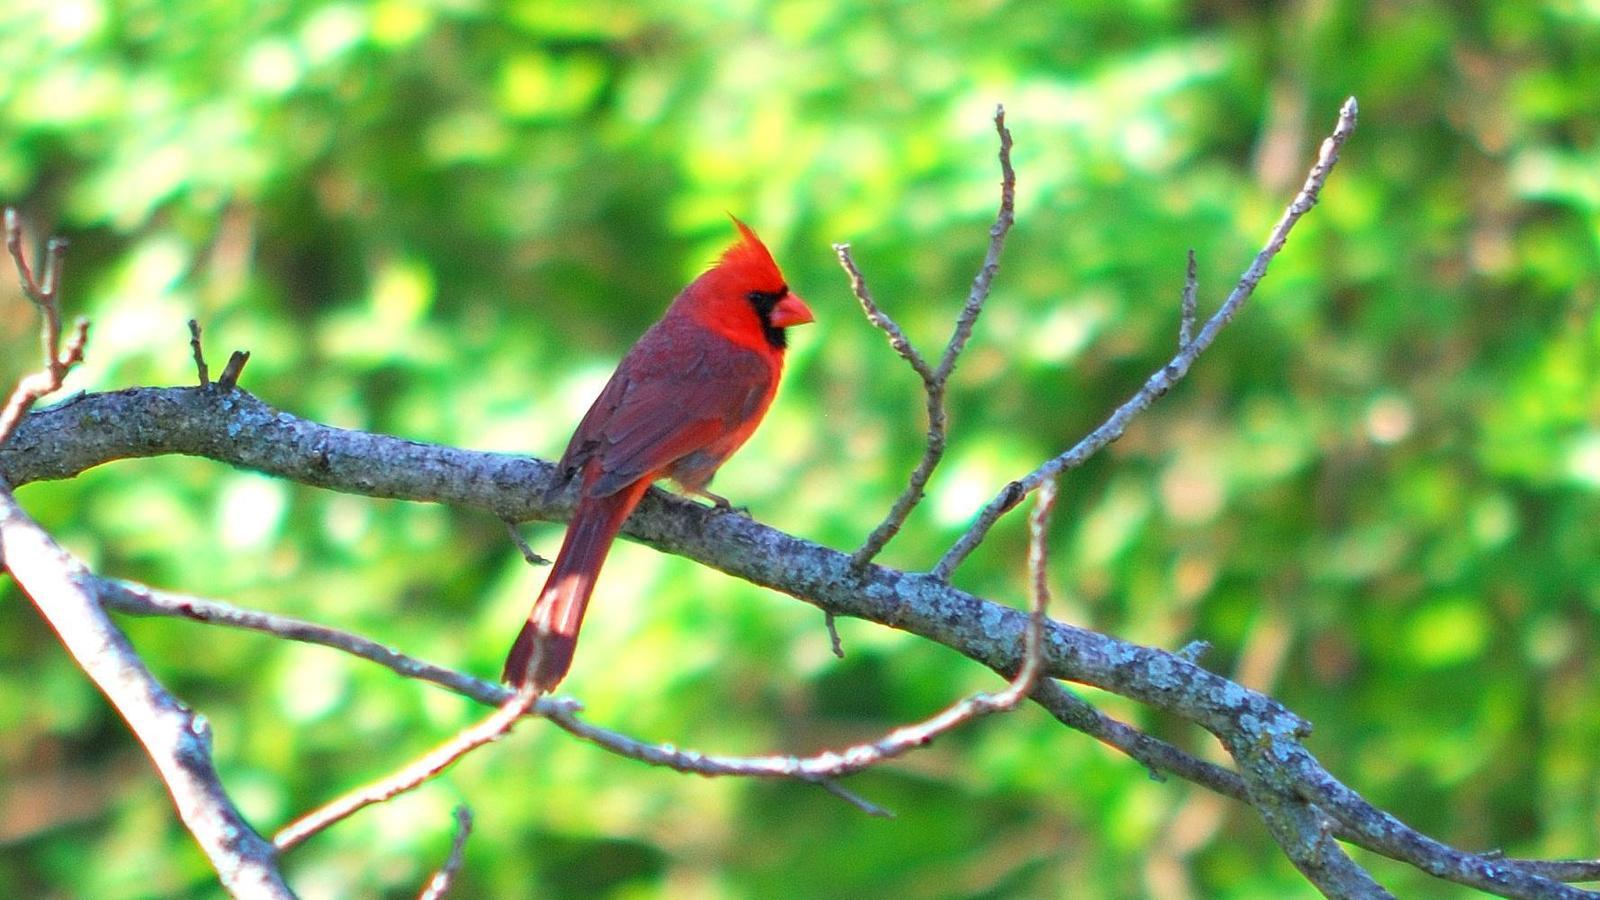 Northern Cardinal Photo by RM Beck